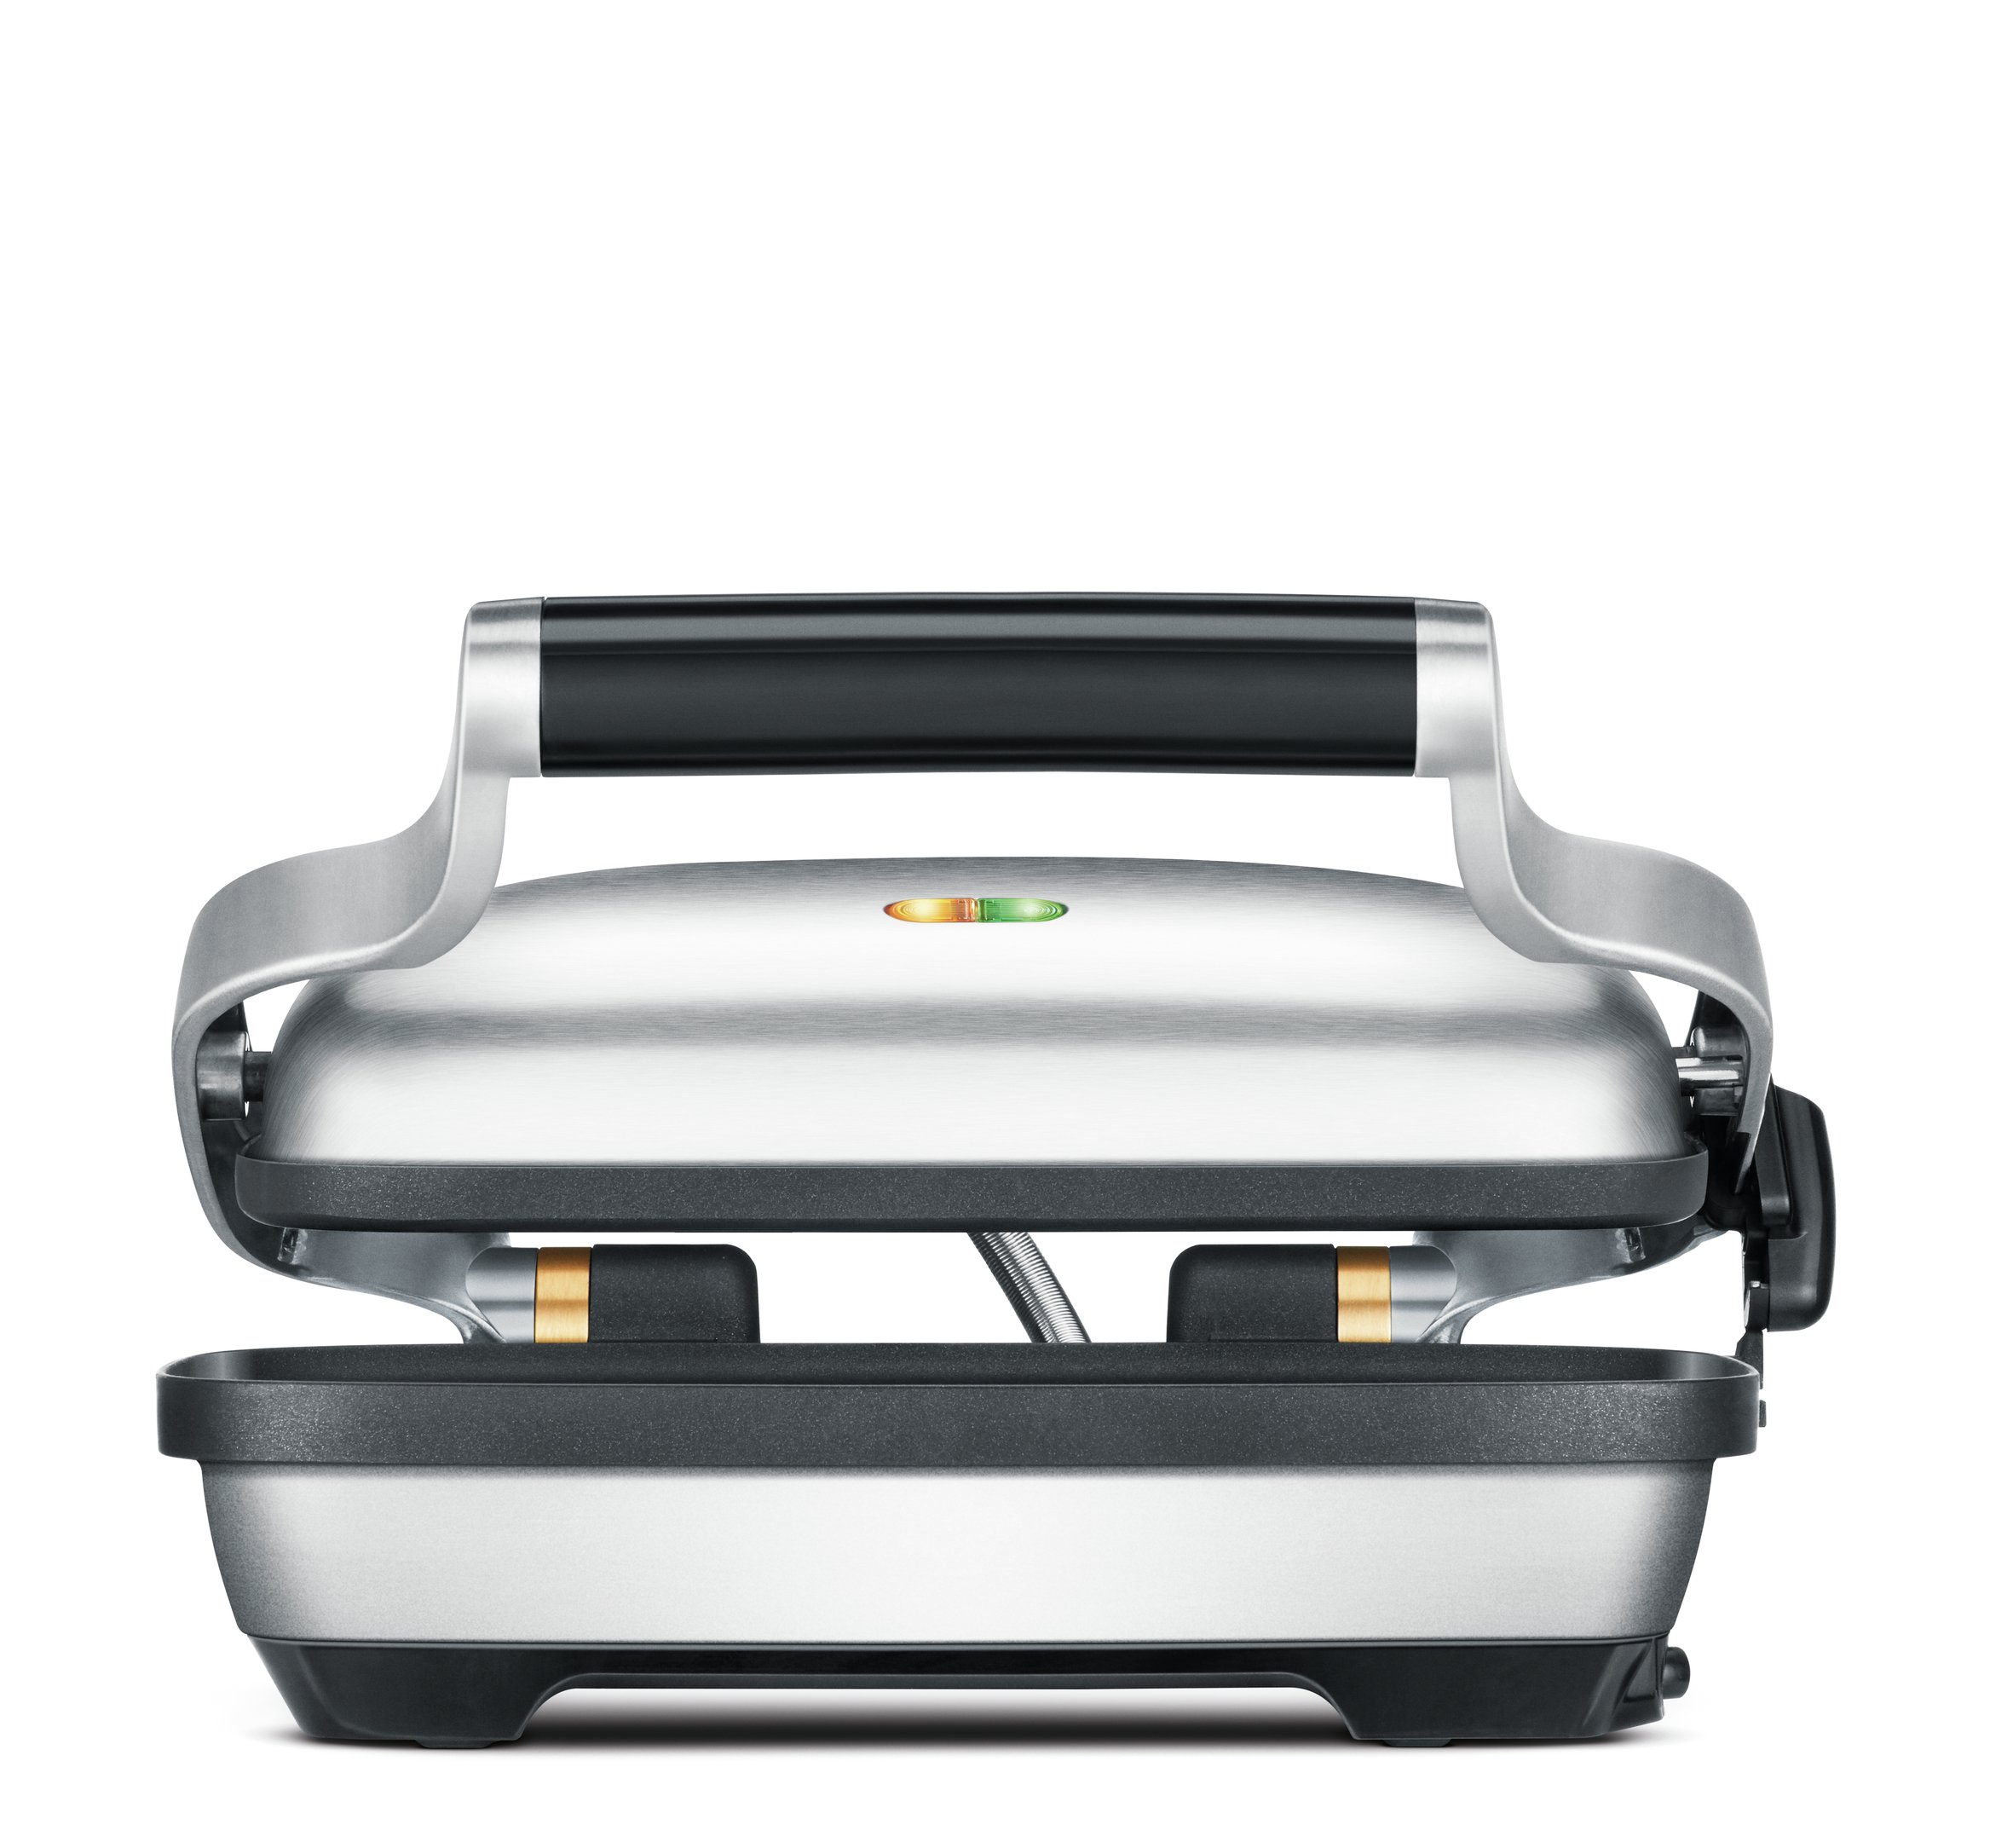 Breville BSG600BSS Panini Press, Brushed Stainless Steel